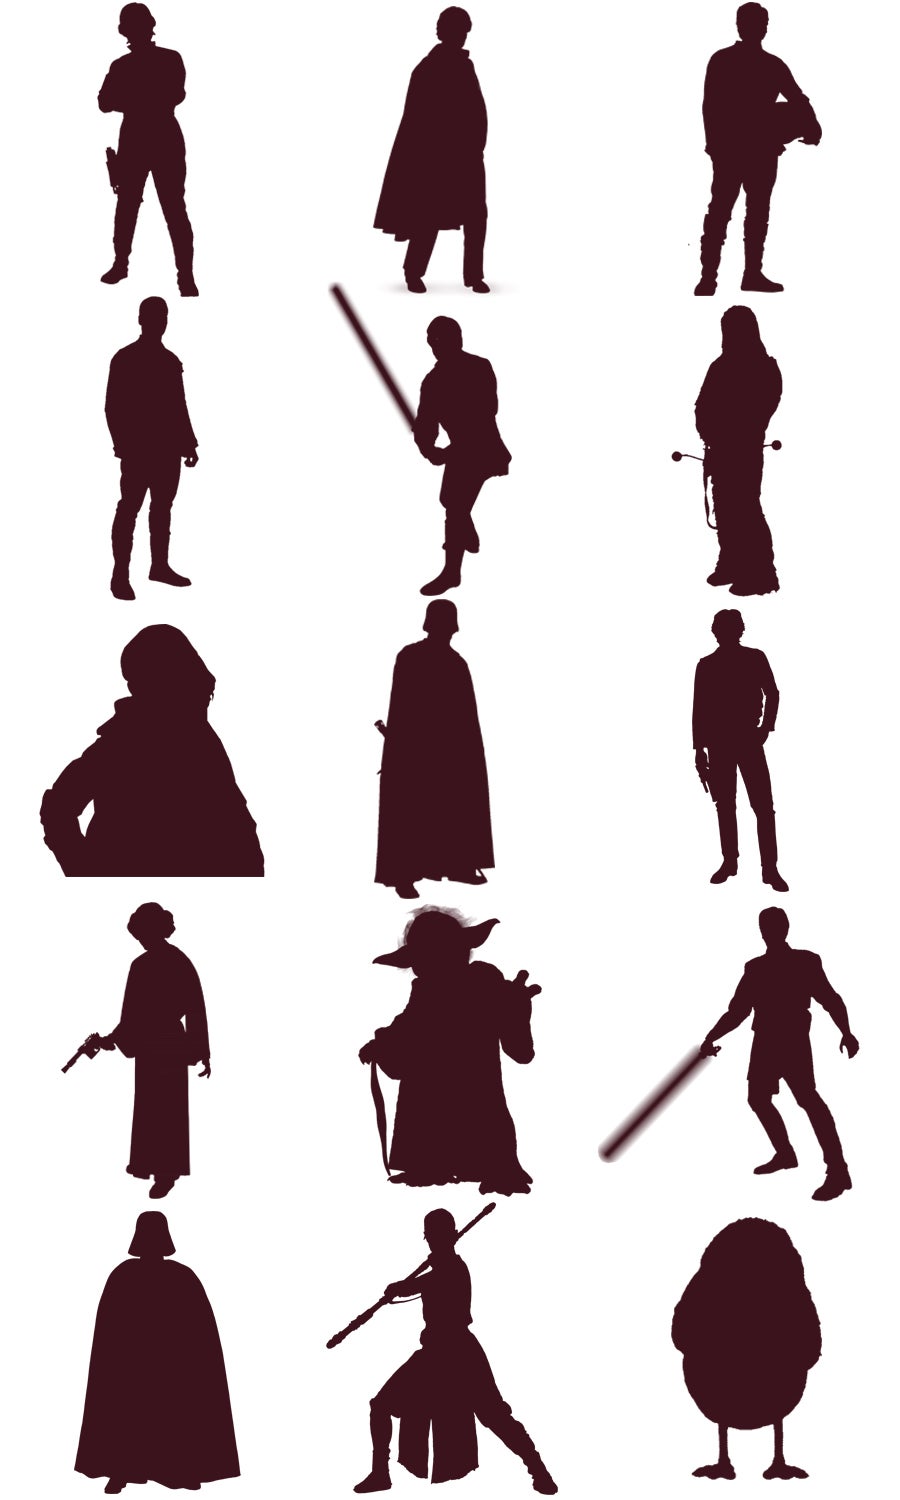 can you identify these star wars characters by just their silhouette